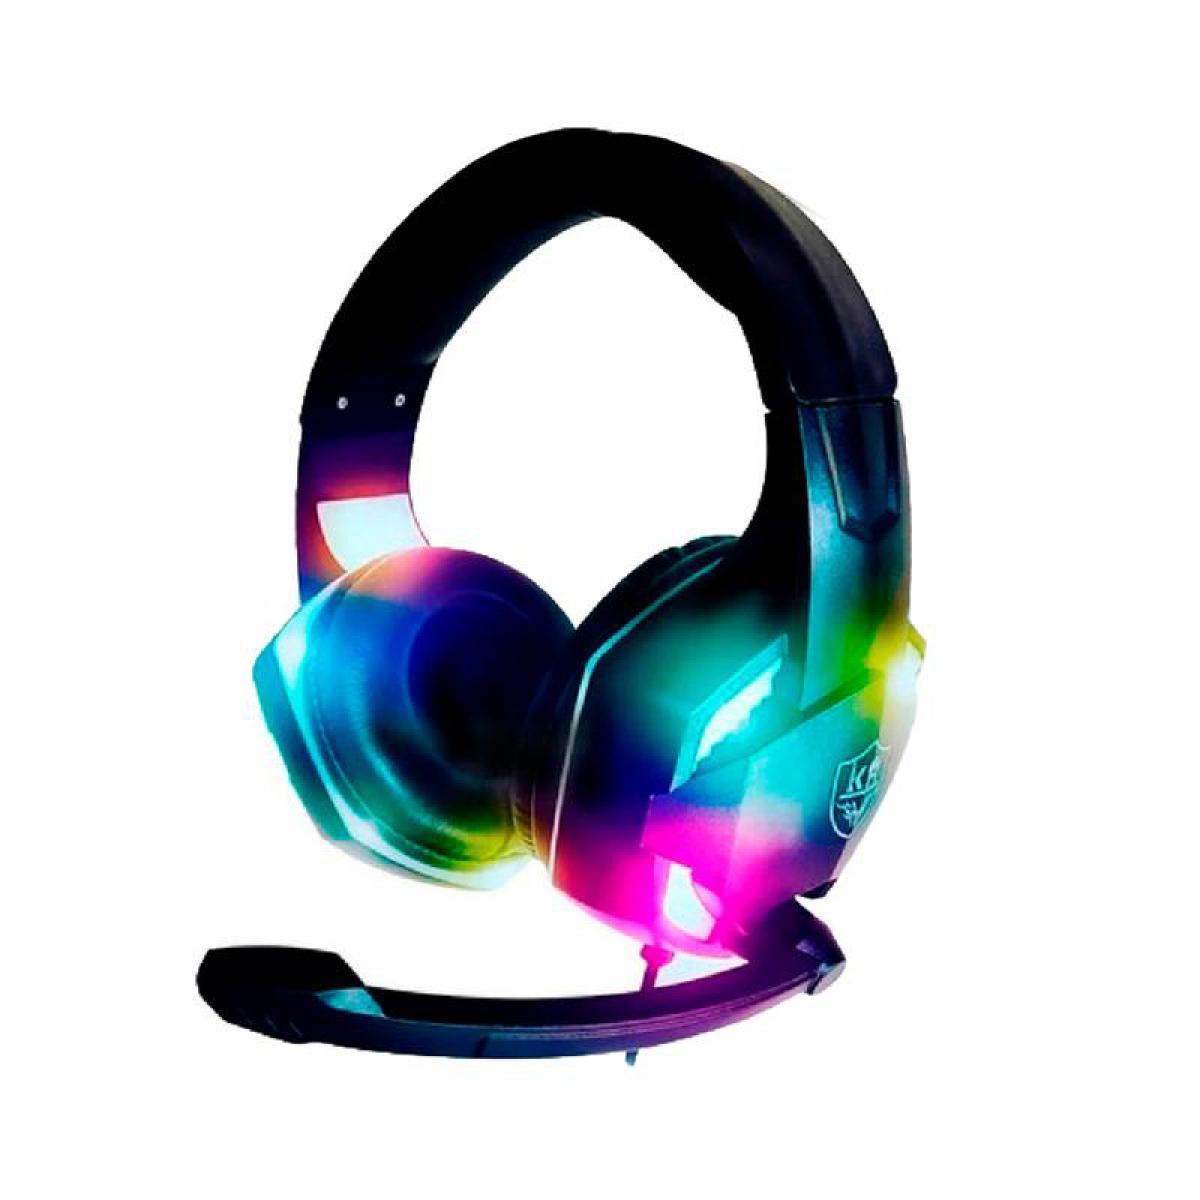 Headset Streaming Gaming  KR-GM303 headsets with RGB light